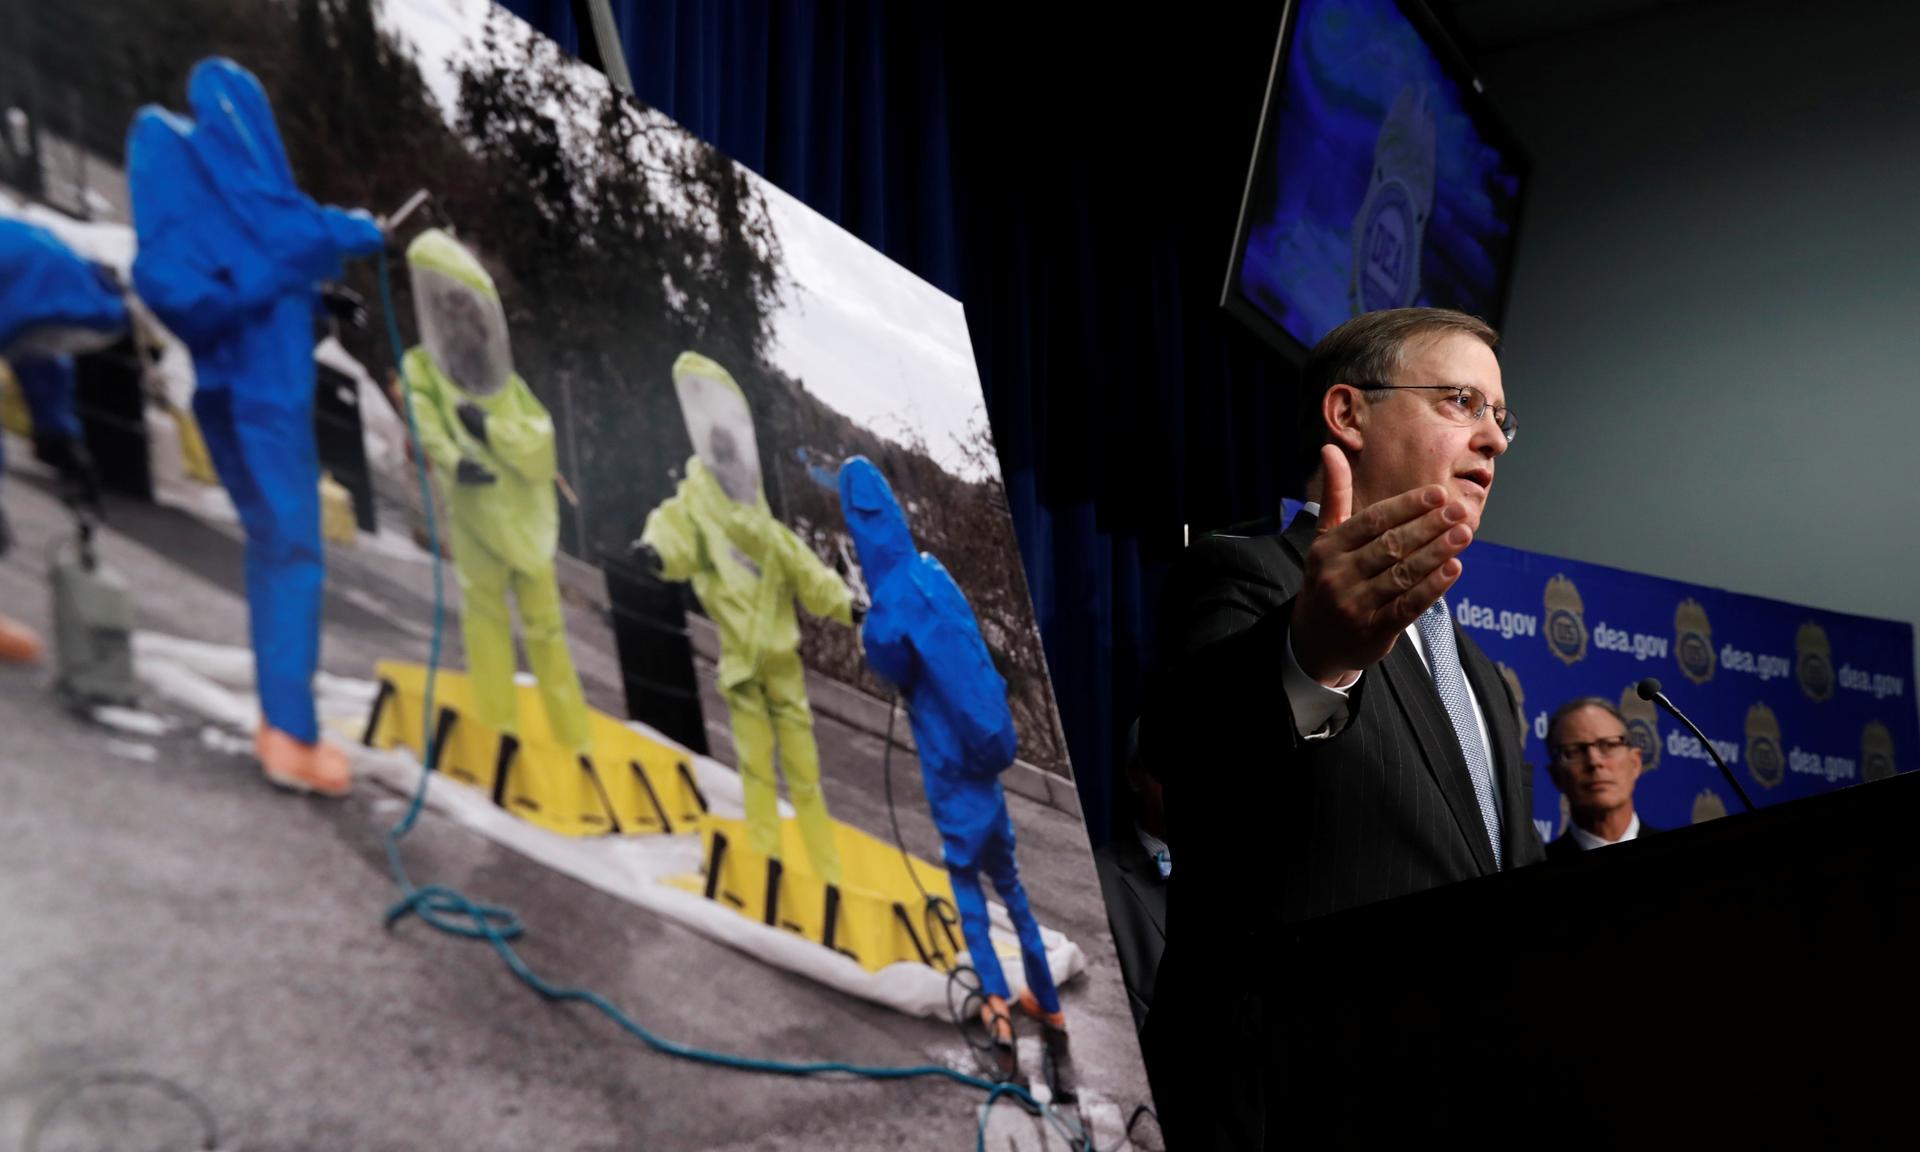 Acting DEA Administrator Chuck Rosenberg speaks during a news conference on the dangers law enforcement and first responders face when encountering fentanyl at DEA Headquarters in Arlington, Virginia, U.S., June 6, 2017.